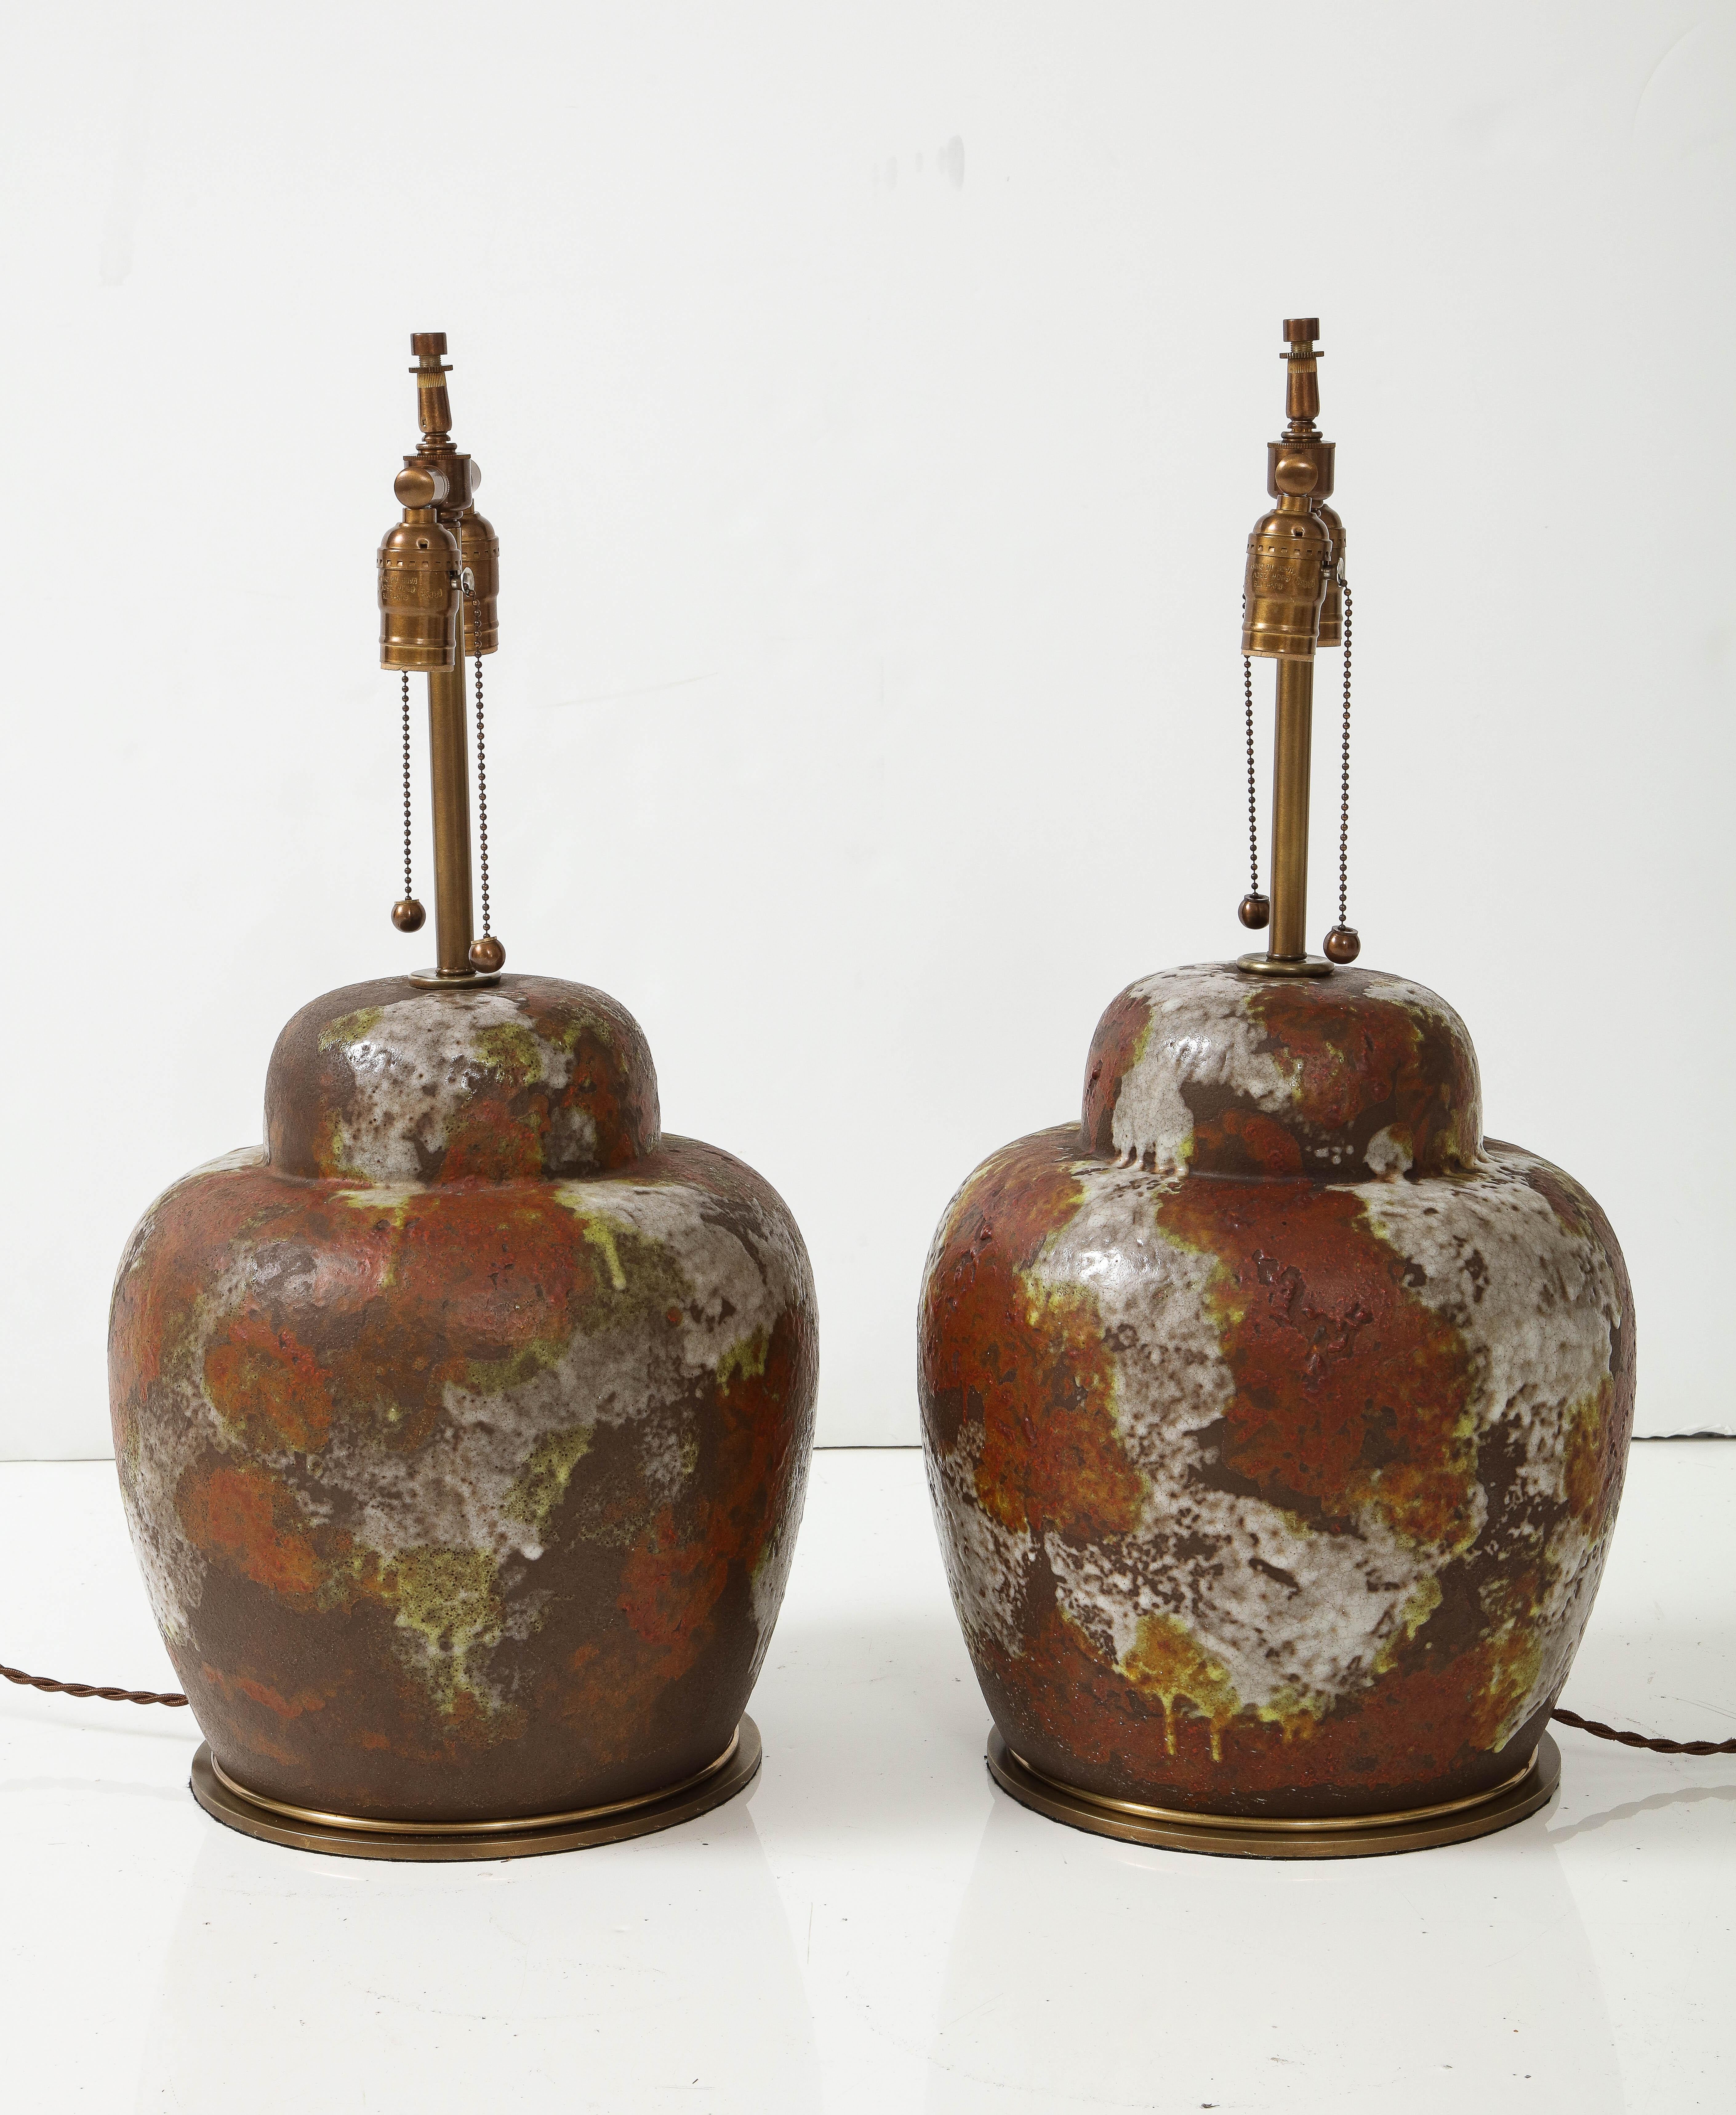 Pair of large scale ceramic ginger jar form lamps featuring a matte mottled glaze in colors of brown, rust, wasabi green and white. Rewired for use in the USA with bronze double pull chain sockets, 75W max each socket, brown knit covered cords.